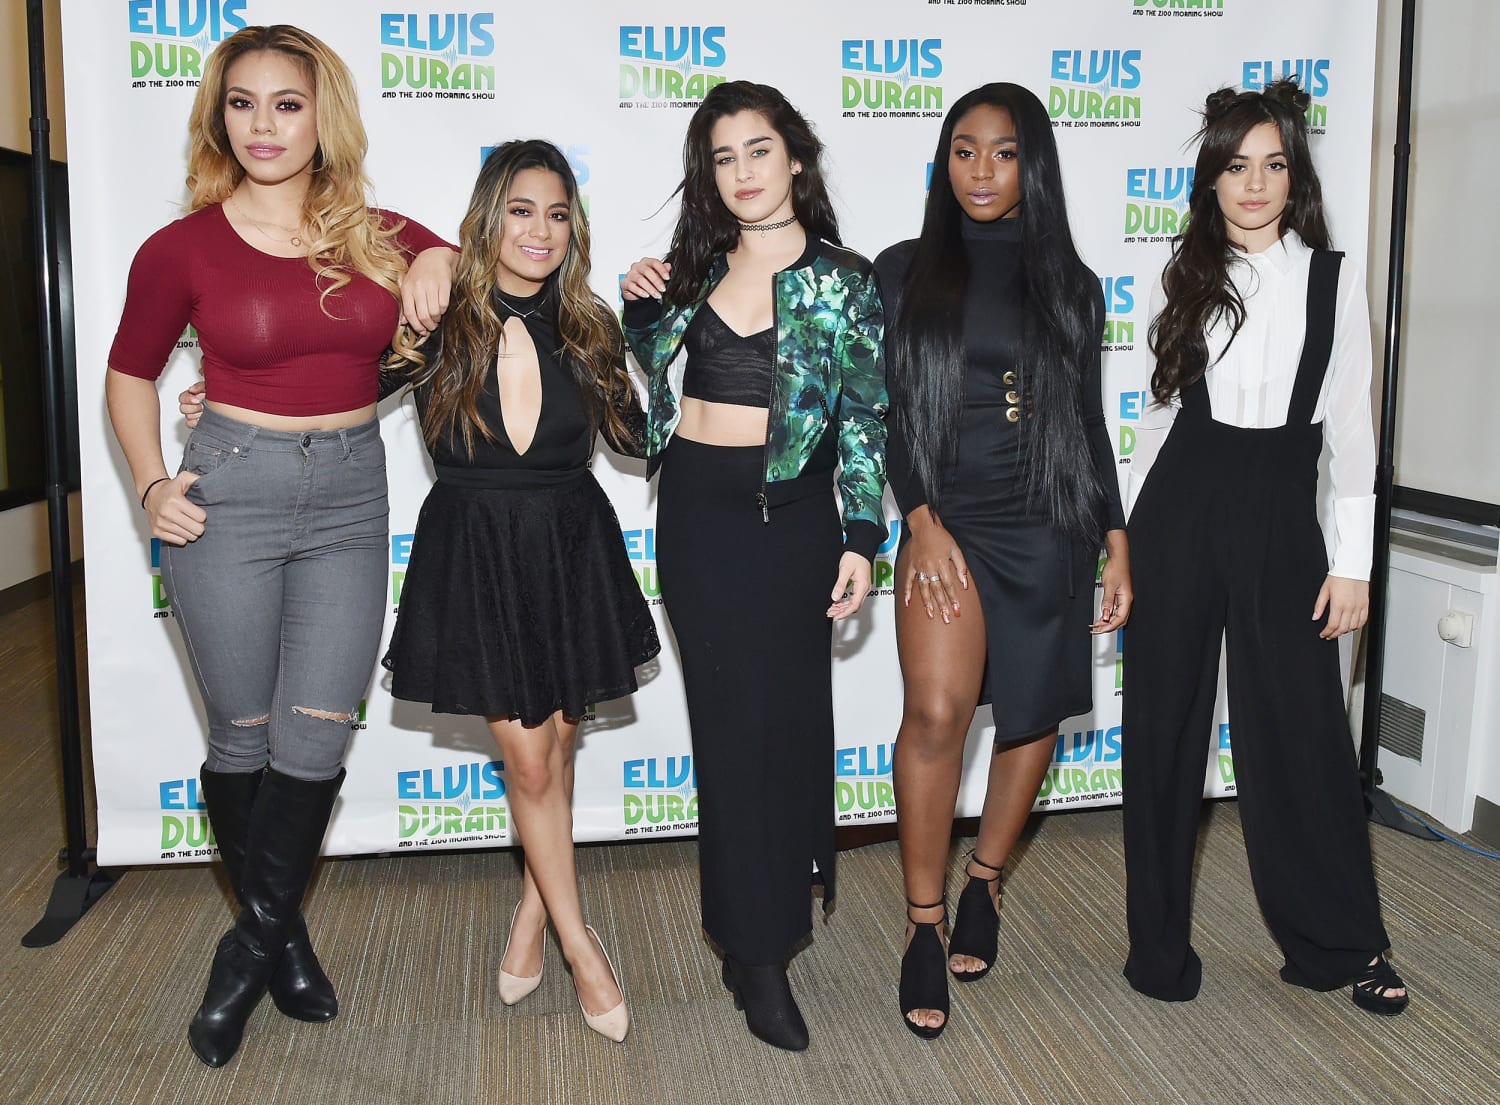 Dinah Jane hilariously reacts to viral video dragging Fifth Harmony's style